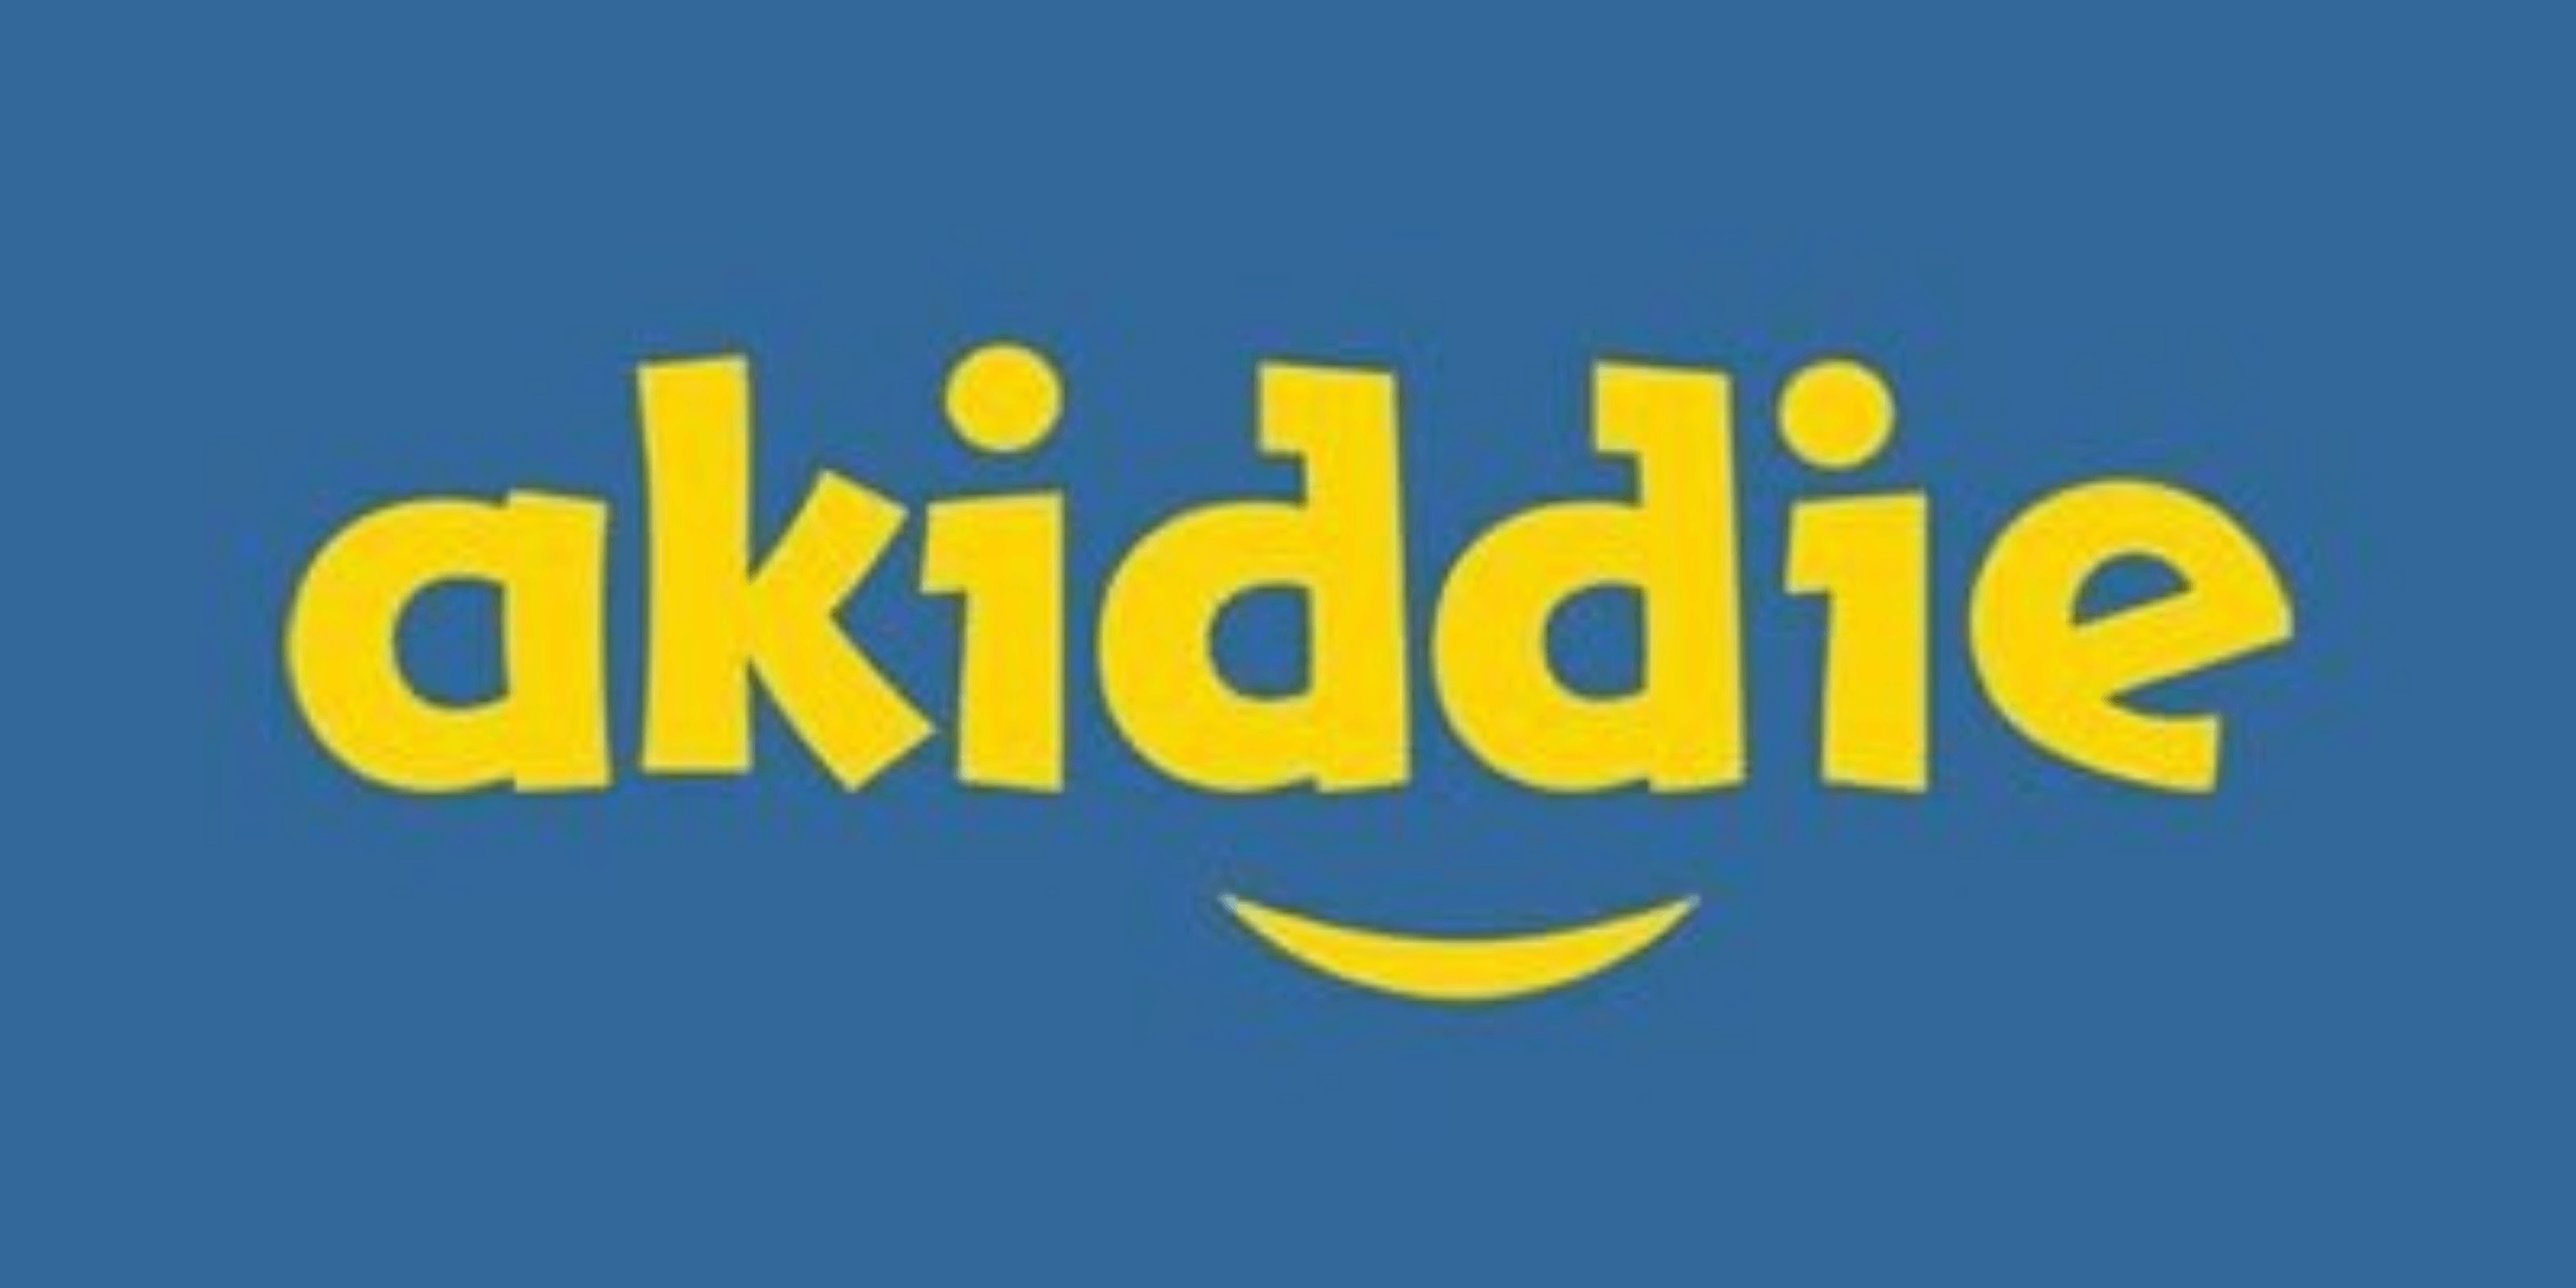 Akiddie: Giving children the chance to read African stories